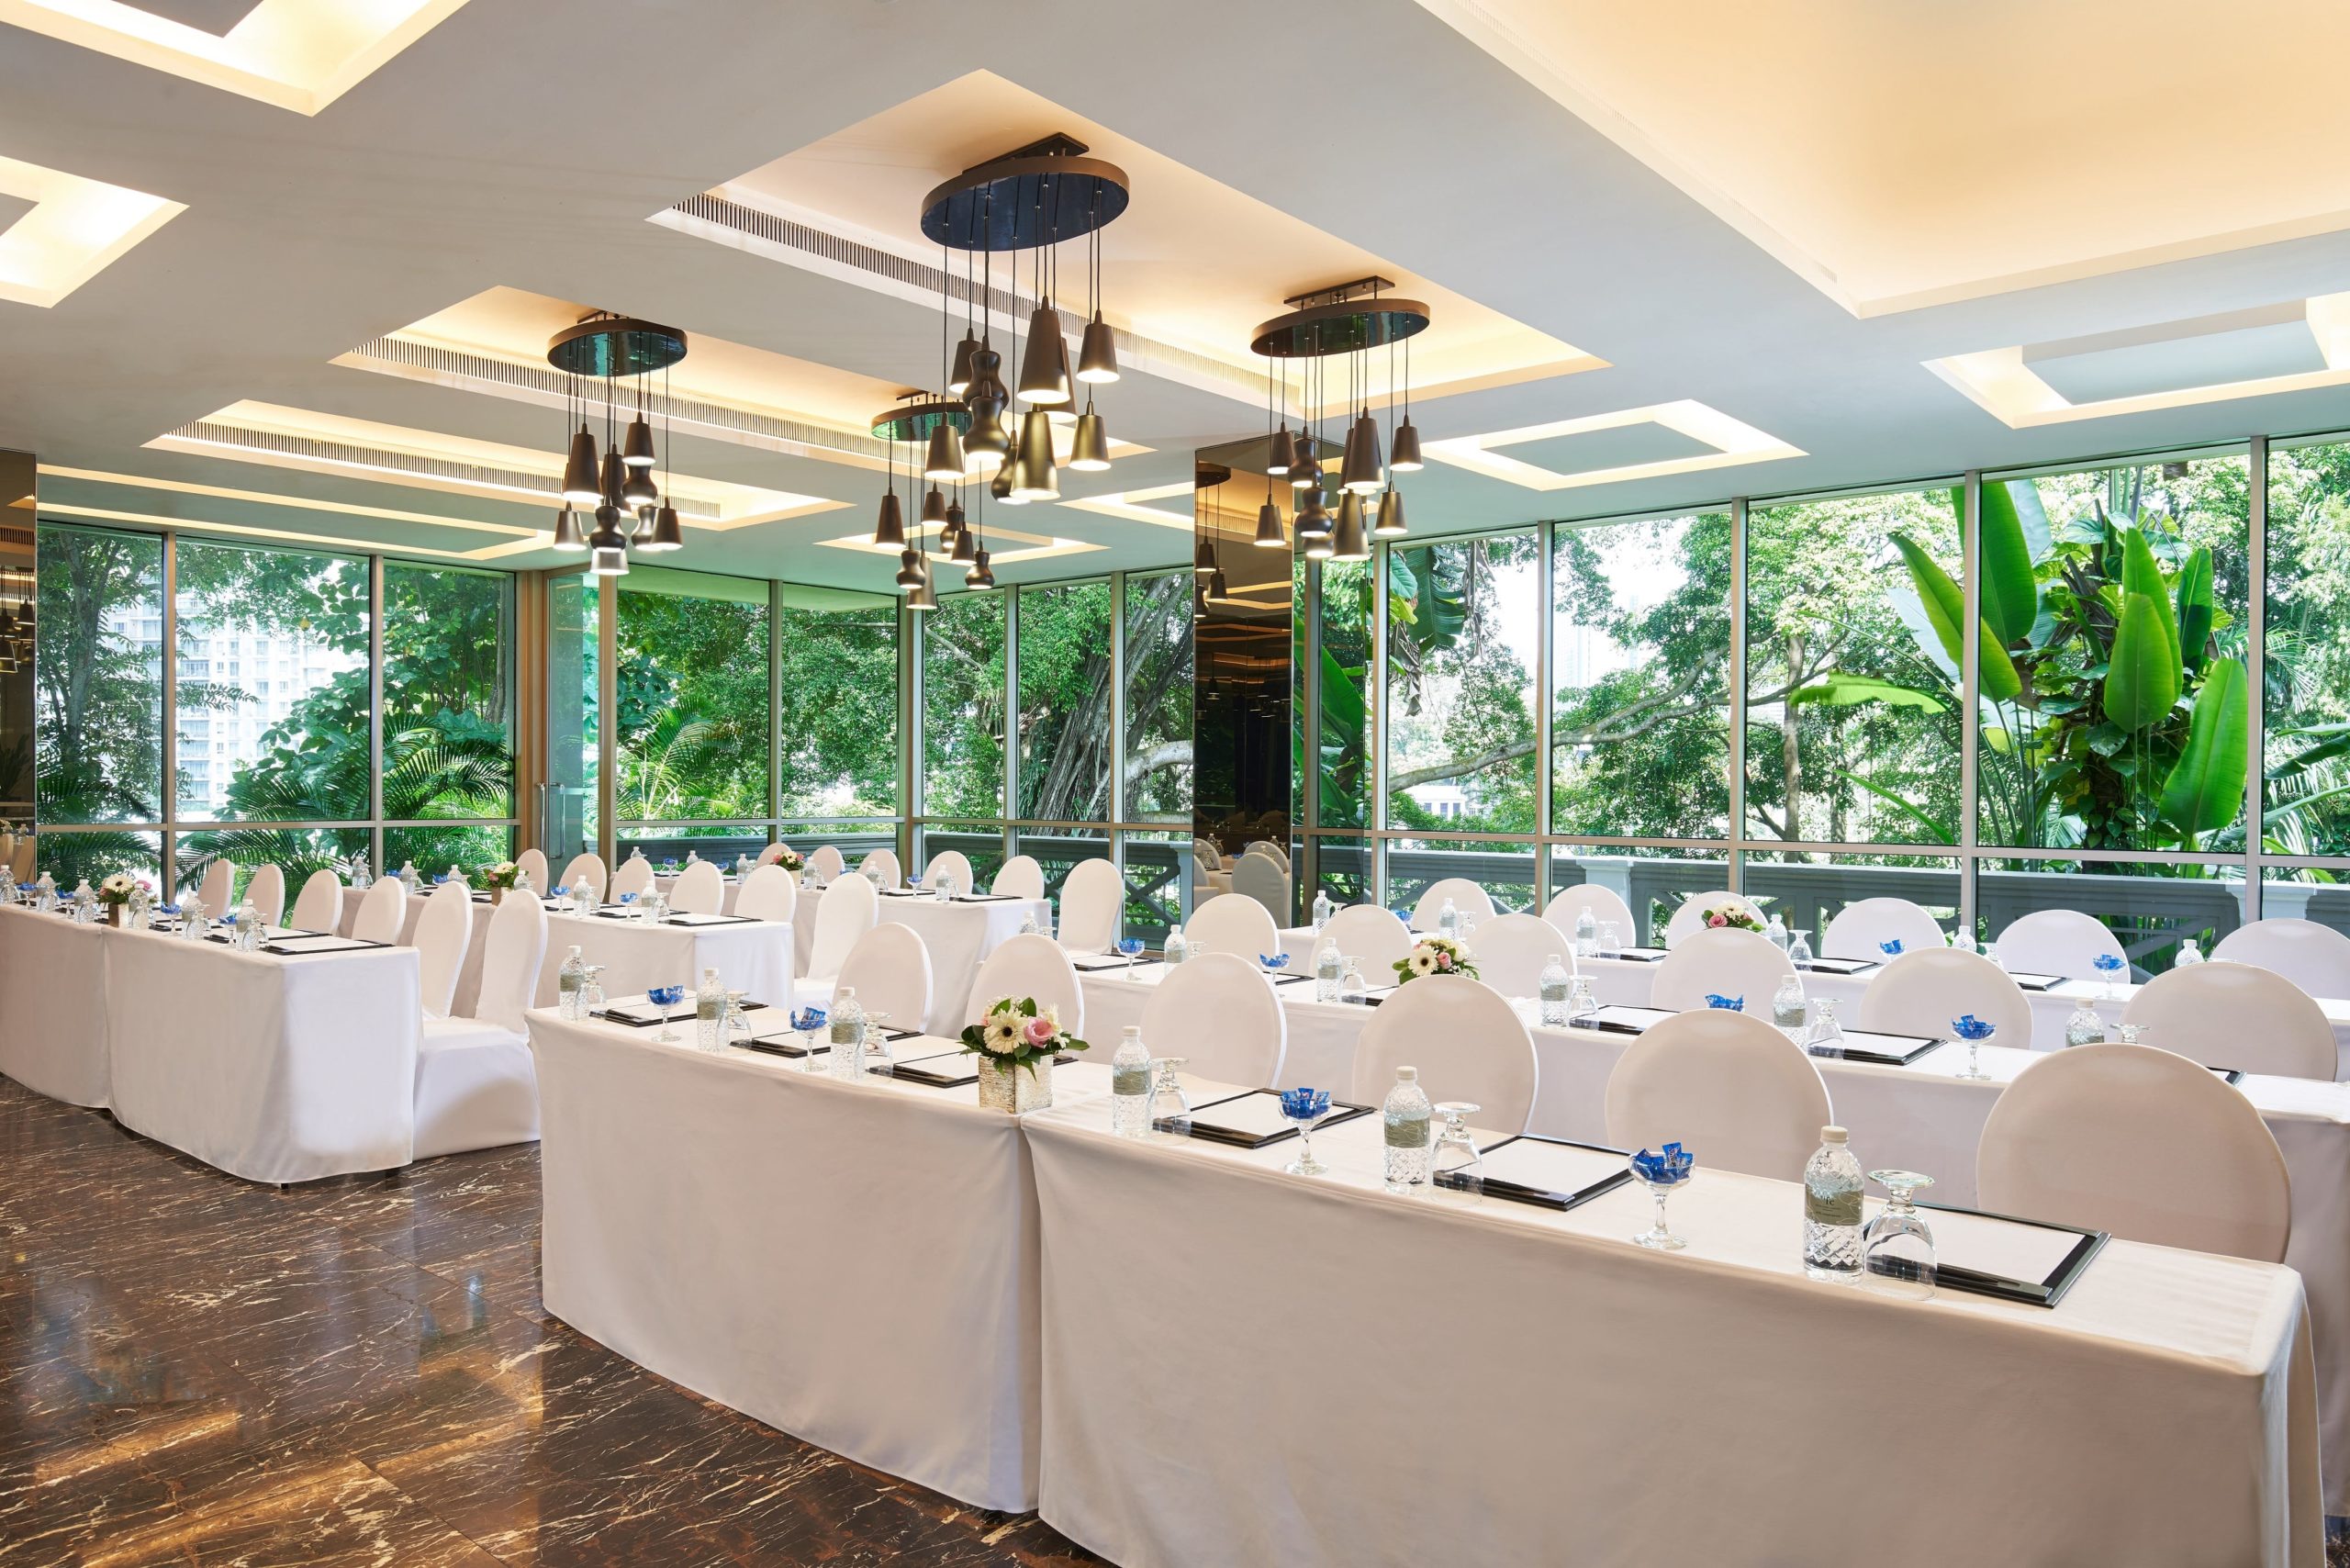 Top Wedding Venues In Singapore For Any Size Event Venues Spaces In Singapore We Are Spaces Event Venues Spaces In Singapore We Are Spaces